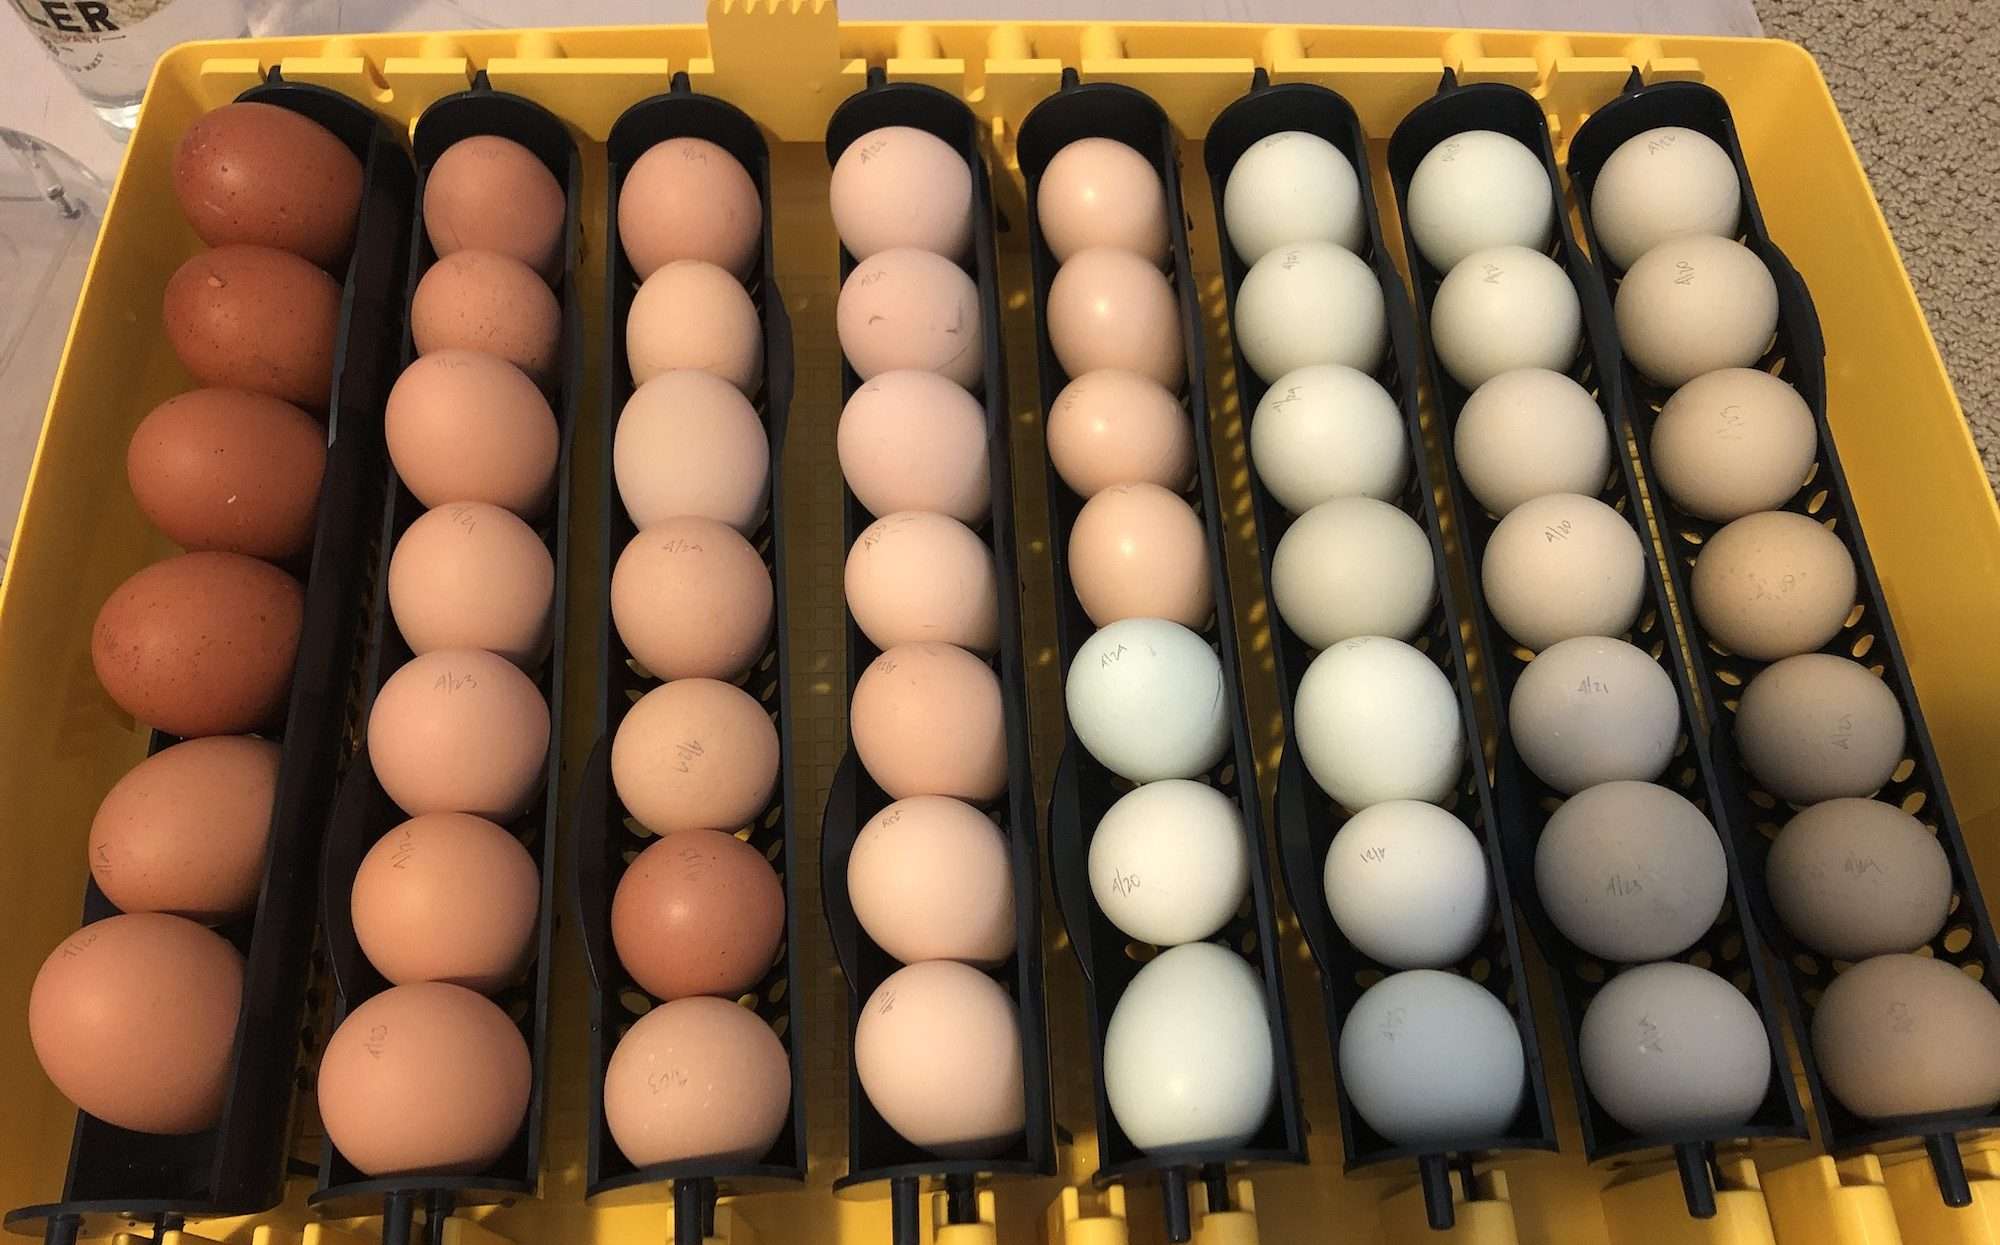 56 eggs loaded into egg turner trays of an incubator